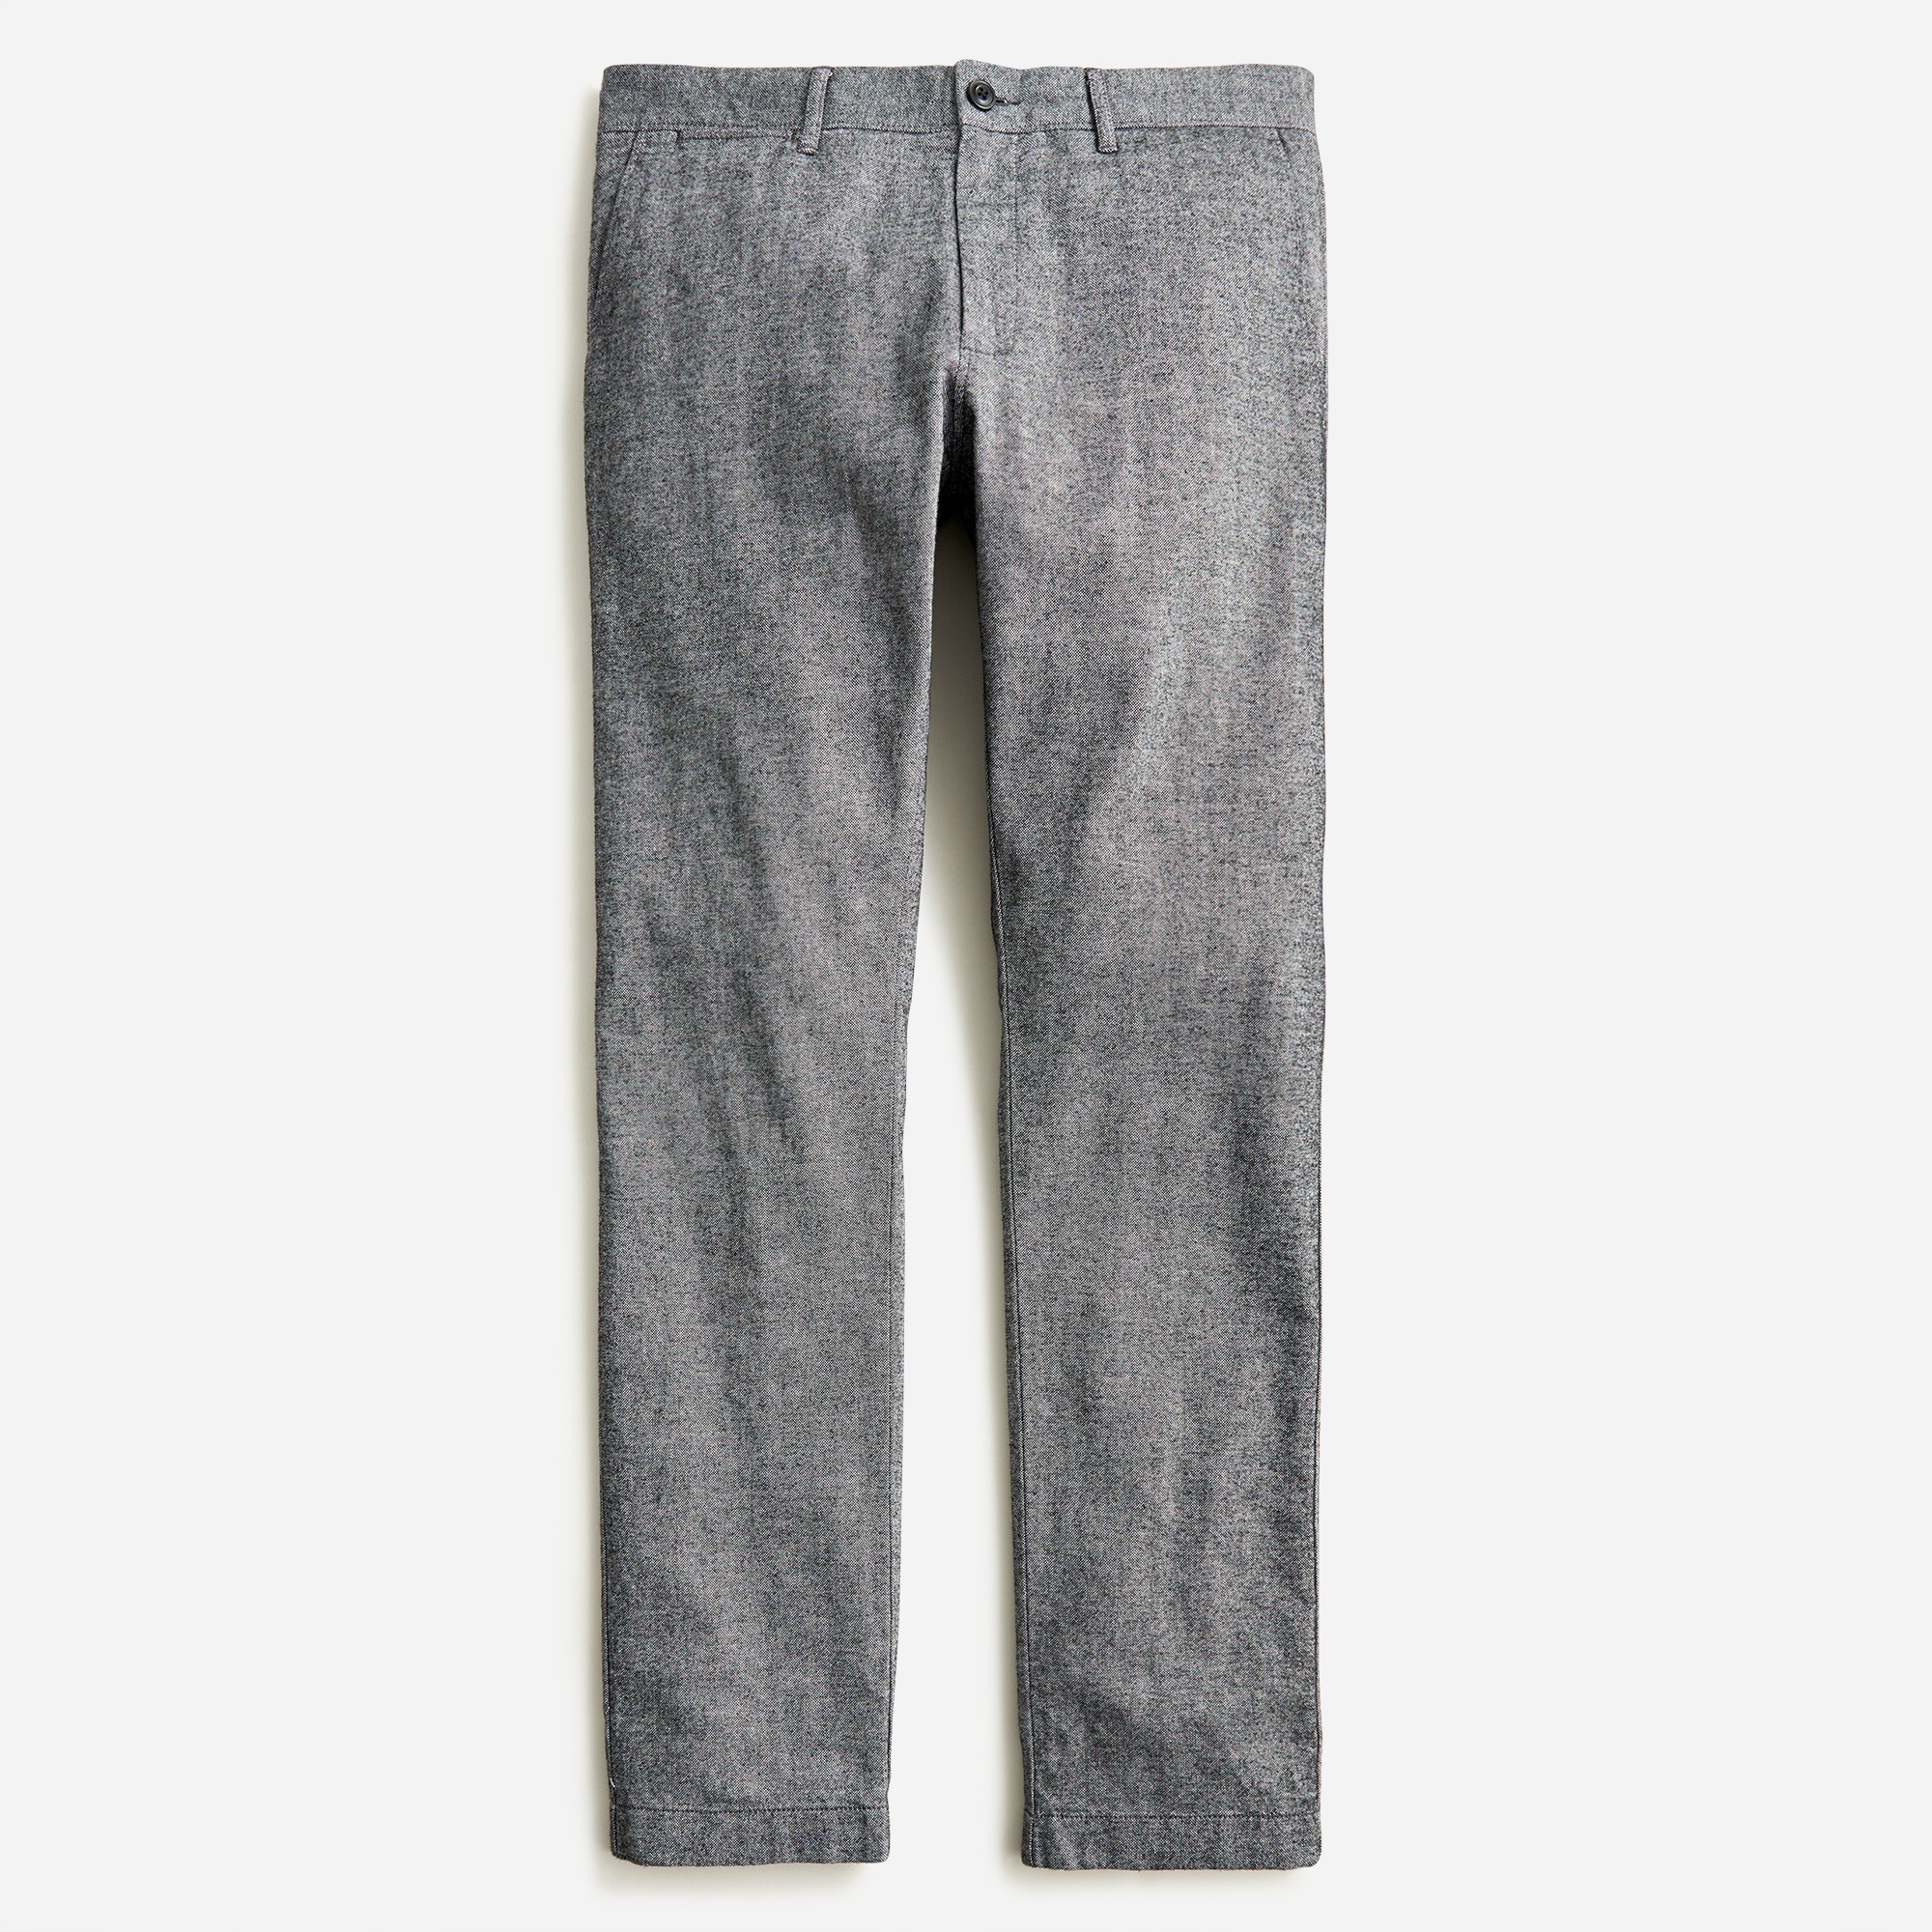  484 Slim-fit brushed twill pant